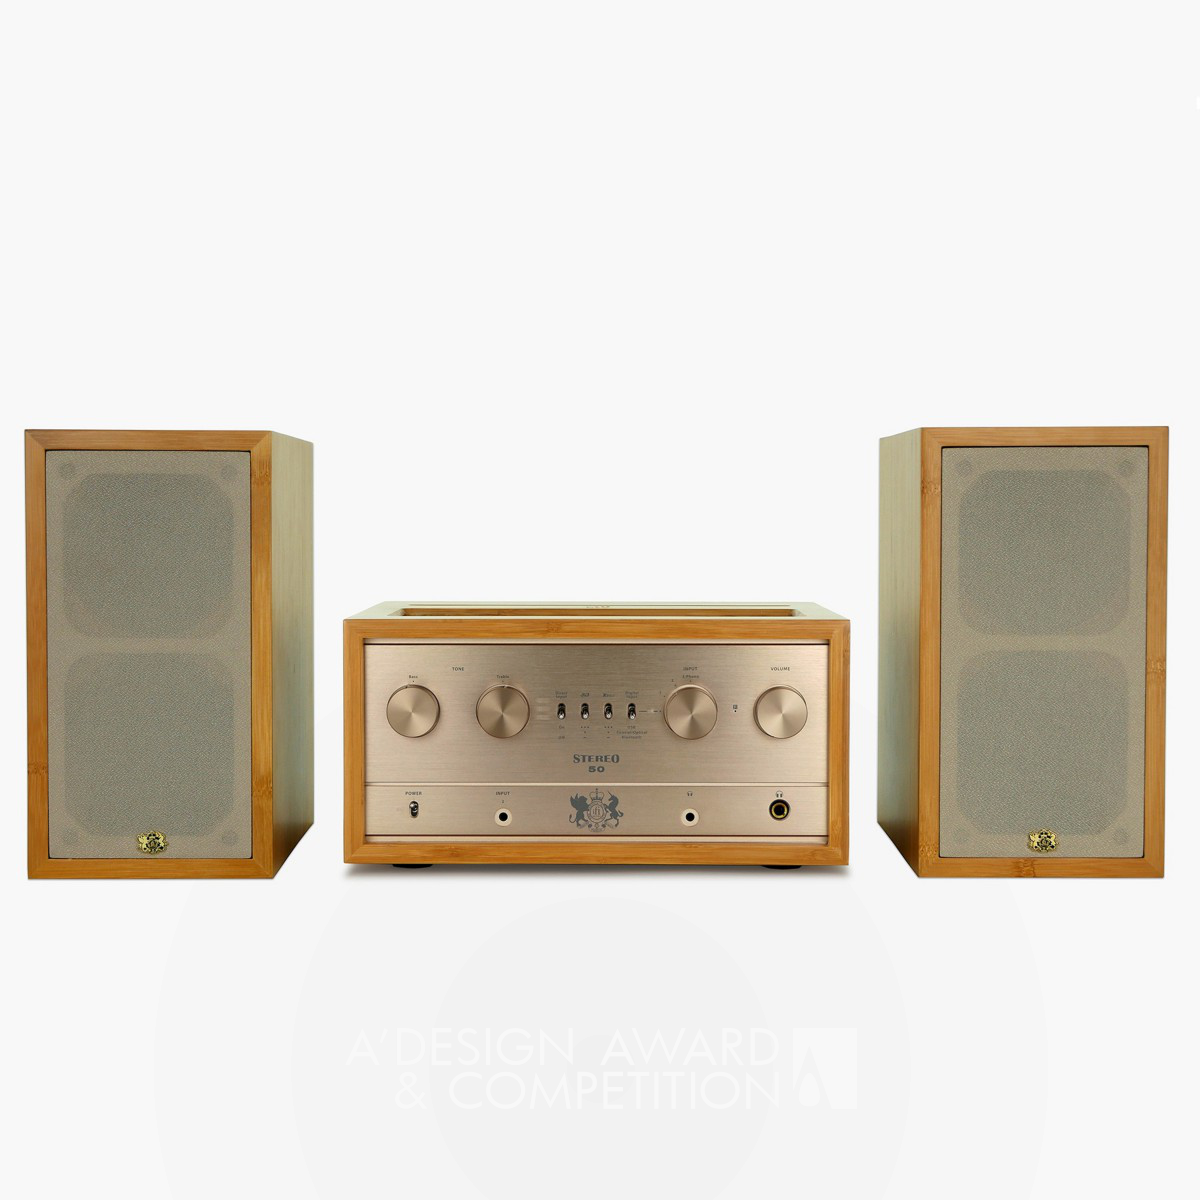 iFi Retro System All-in-one home audio system